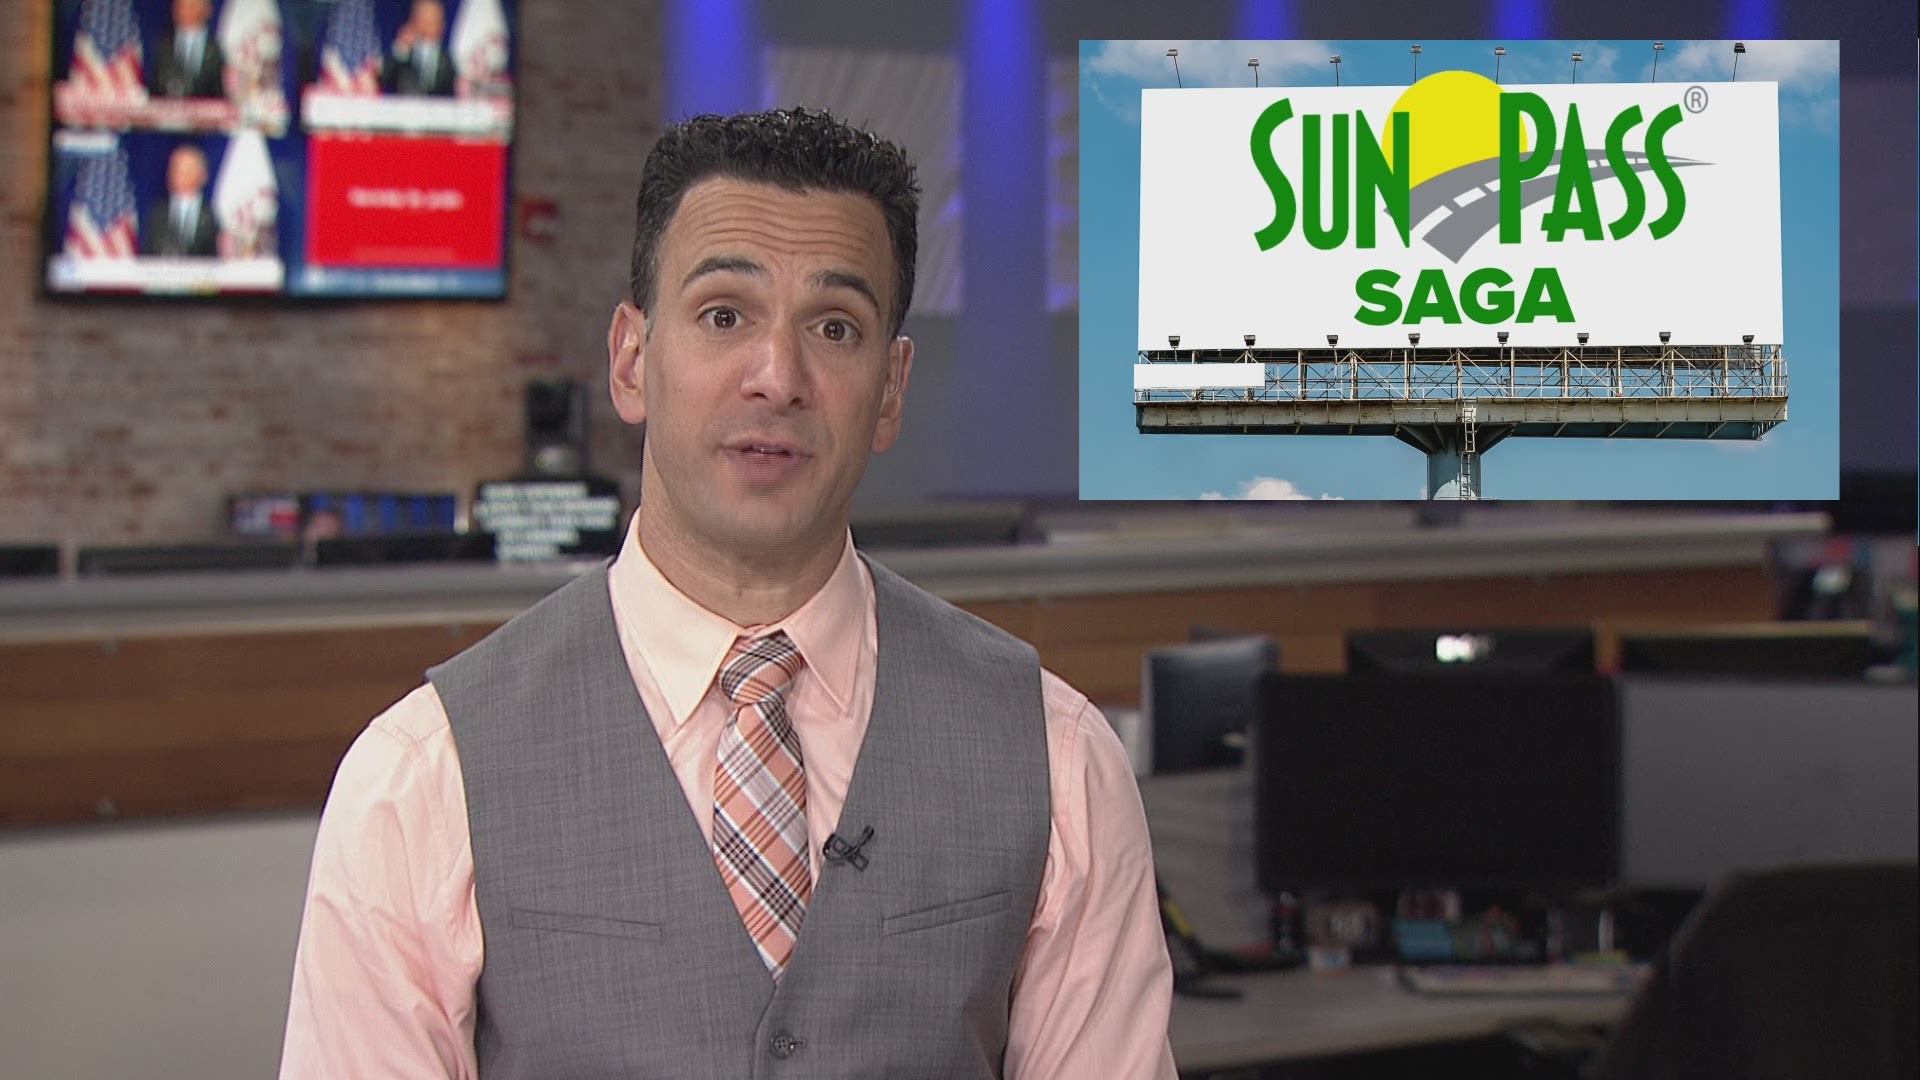 10Investigates Reporter Noah Pransky offers his take on the SunPass catastrophe, which has now carried on for more than 100 days